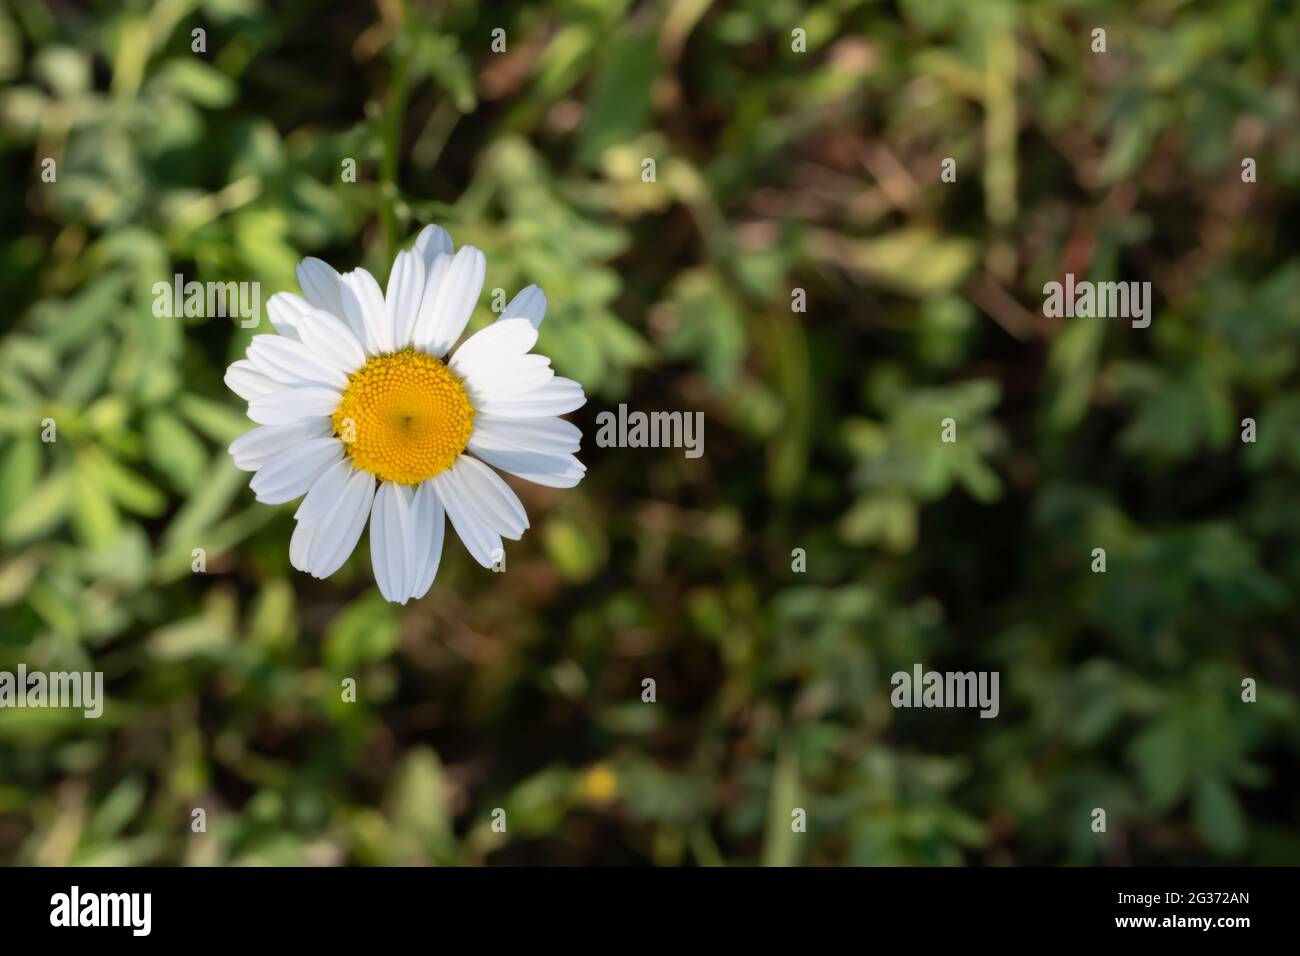 Overhead view of single oxeye daisy - Leucanthemum vulgare - against a green bokeh background. Stock Photo